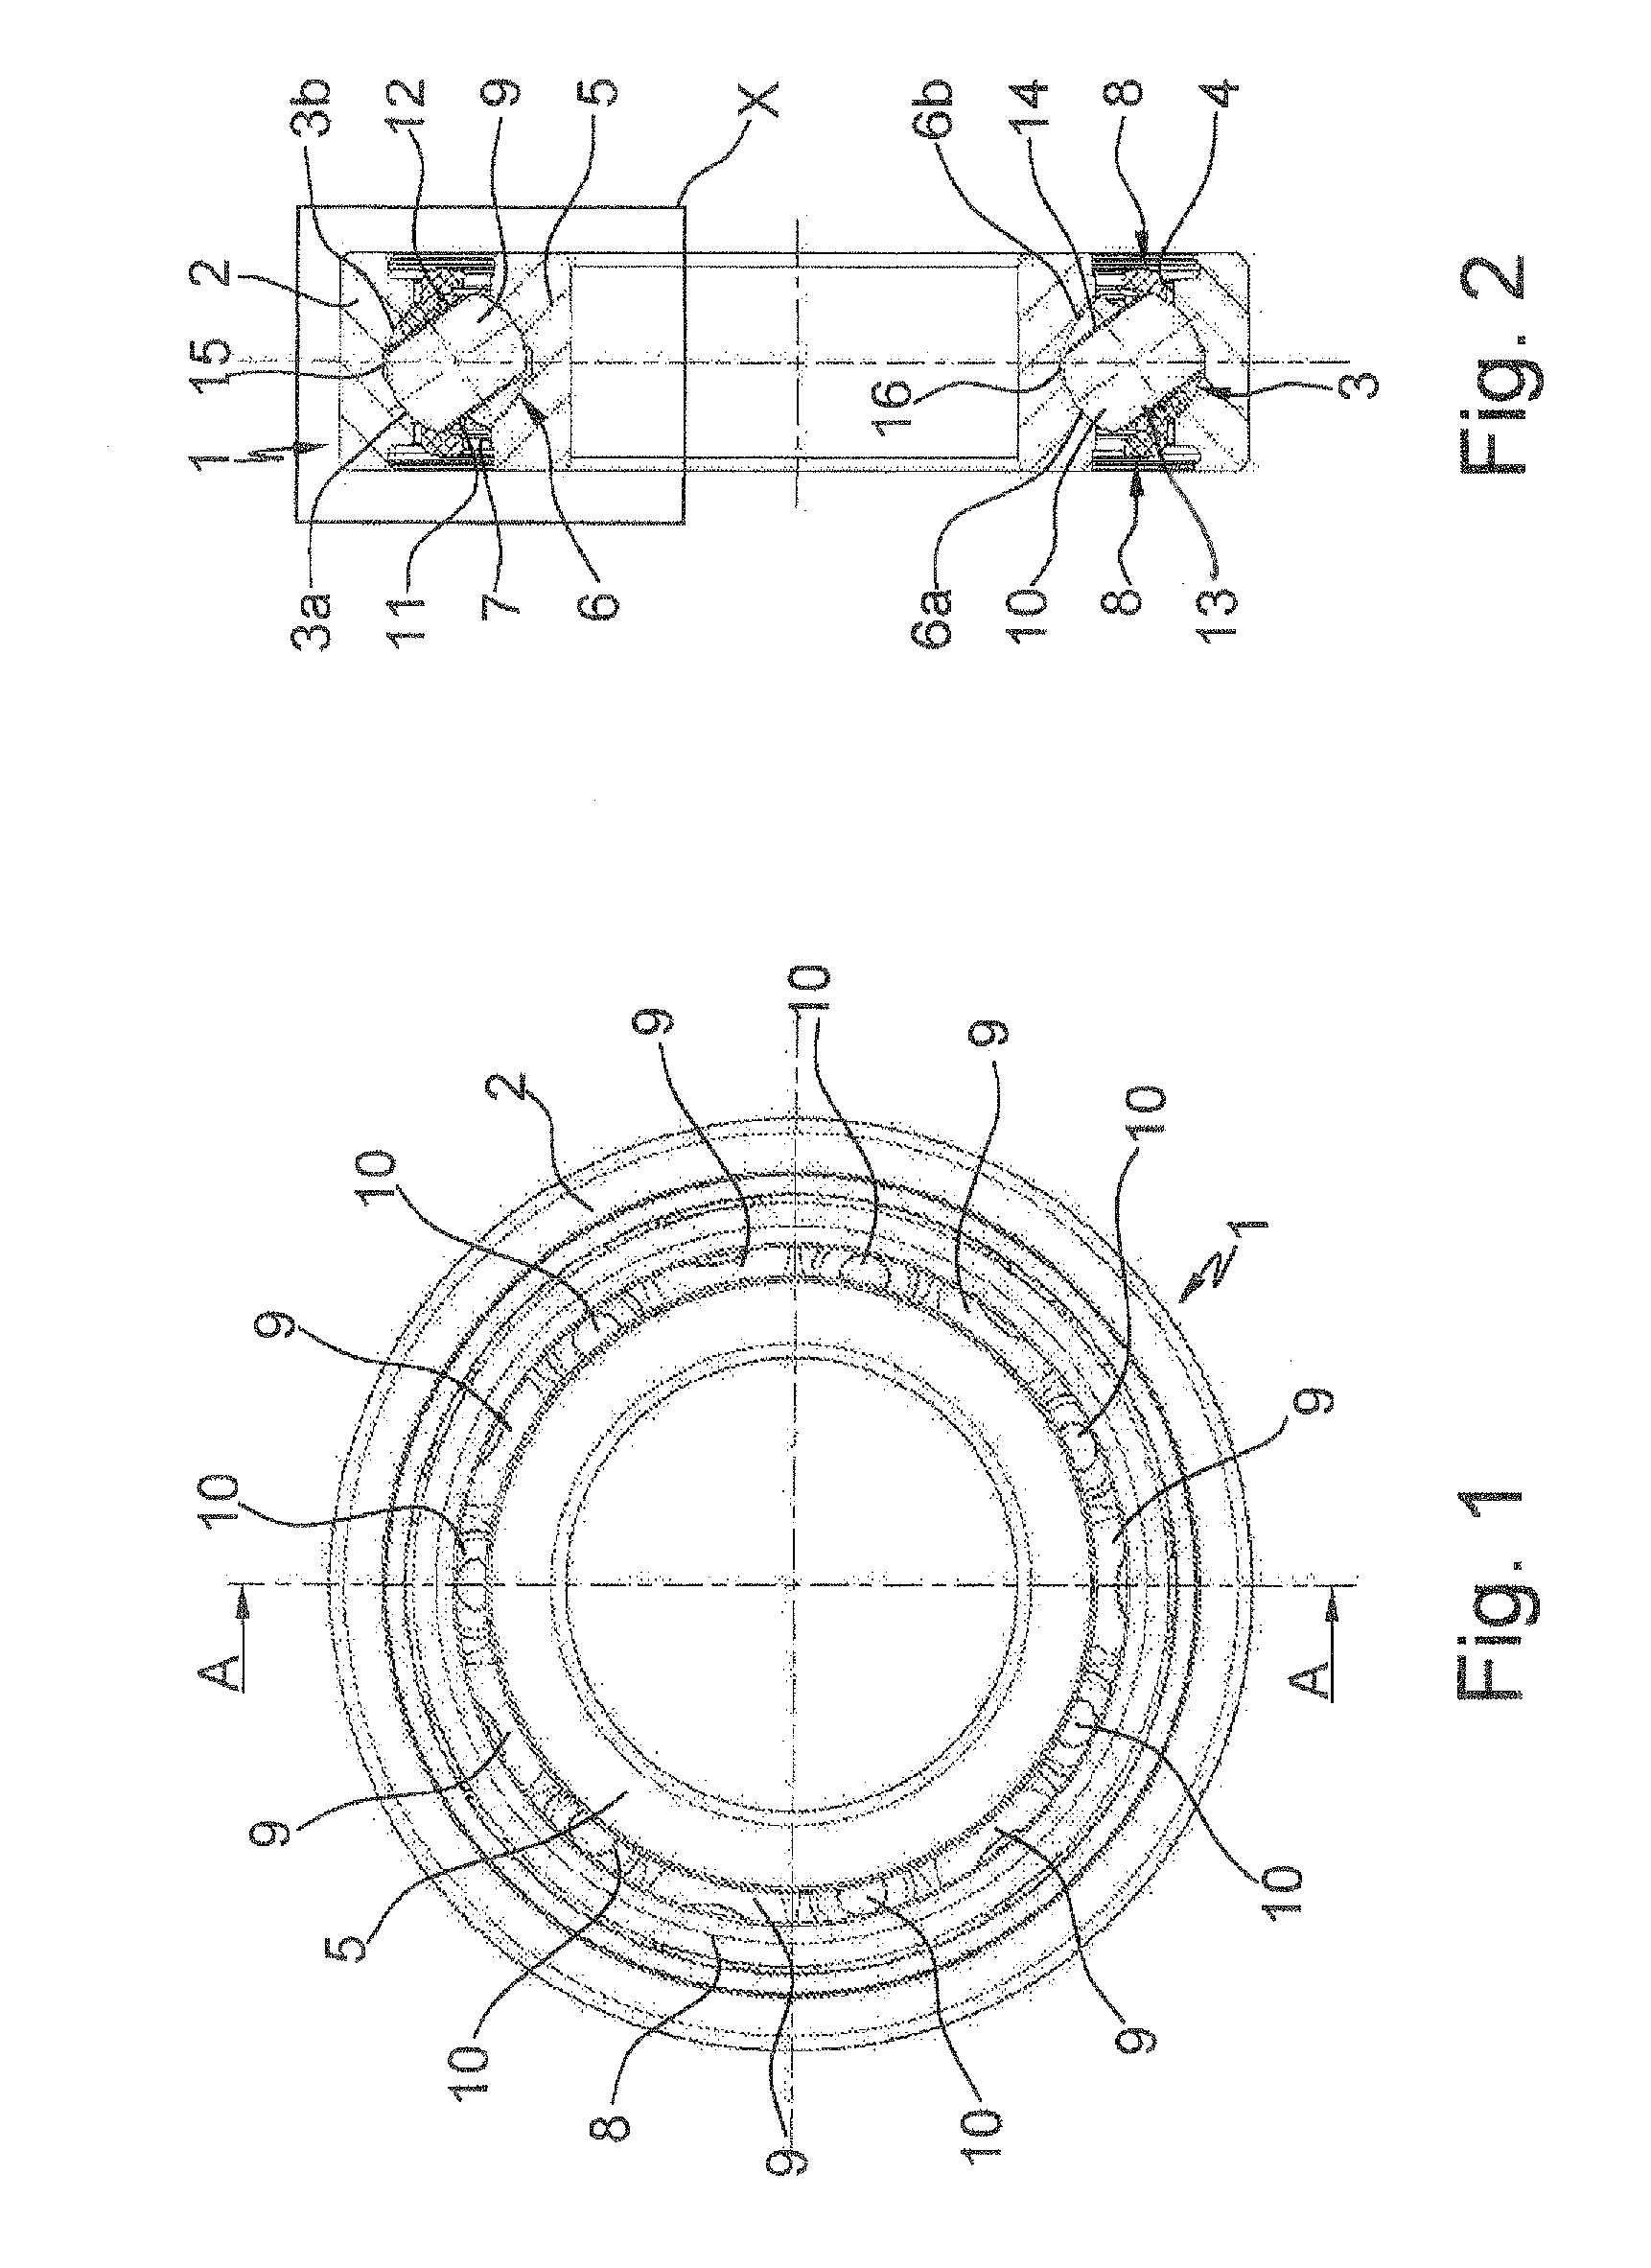 Ball roller bearing, in particular for absorbing combined radial and axial loads